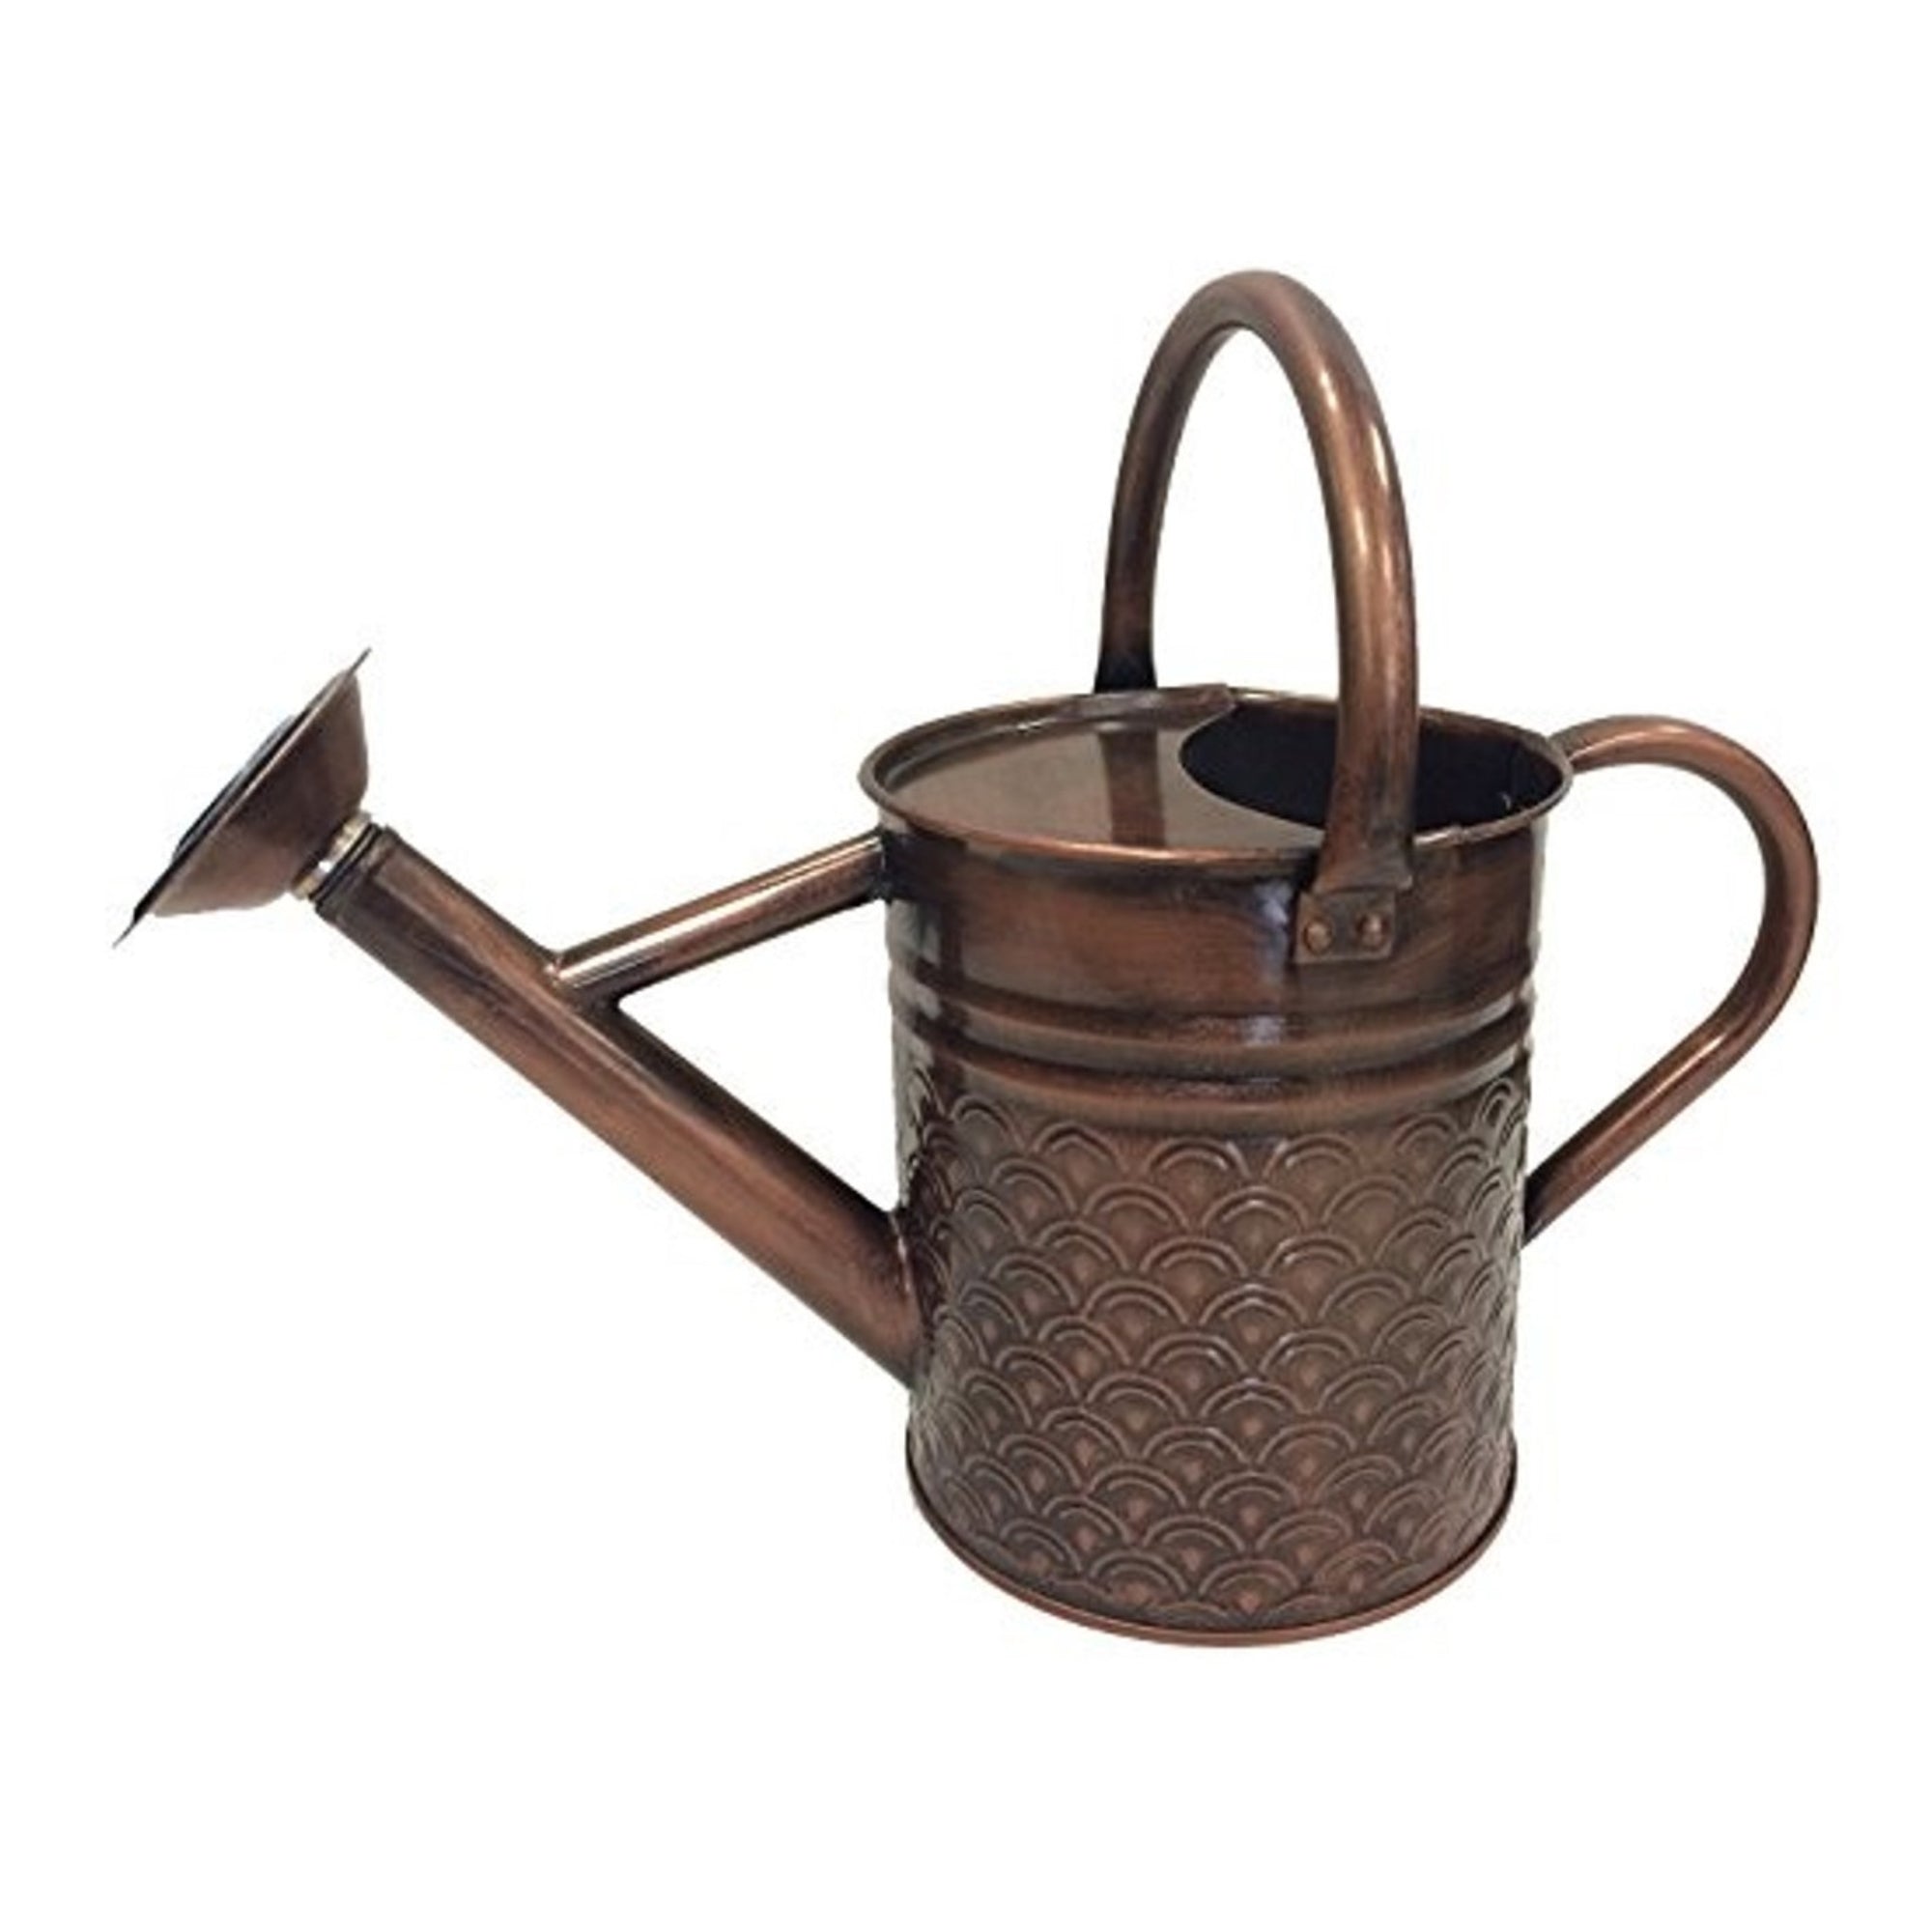 Gardener Select Metal Watering Can with Handles, Copper, 1 Gallon